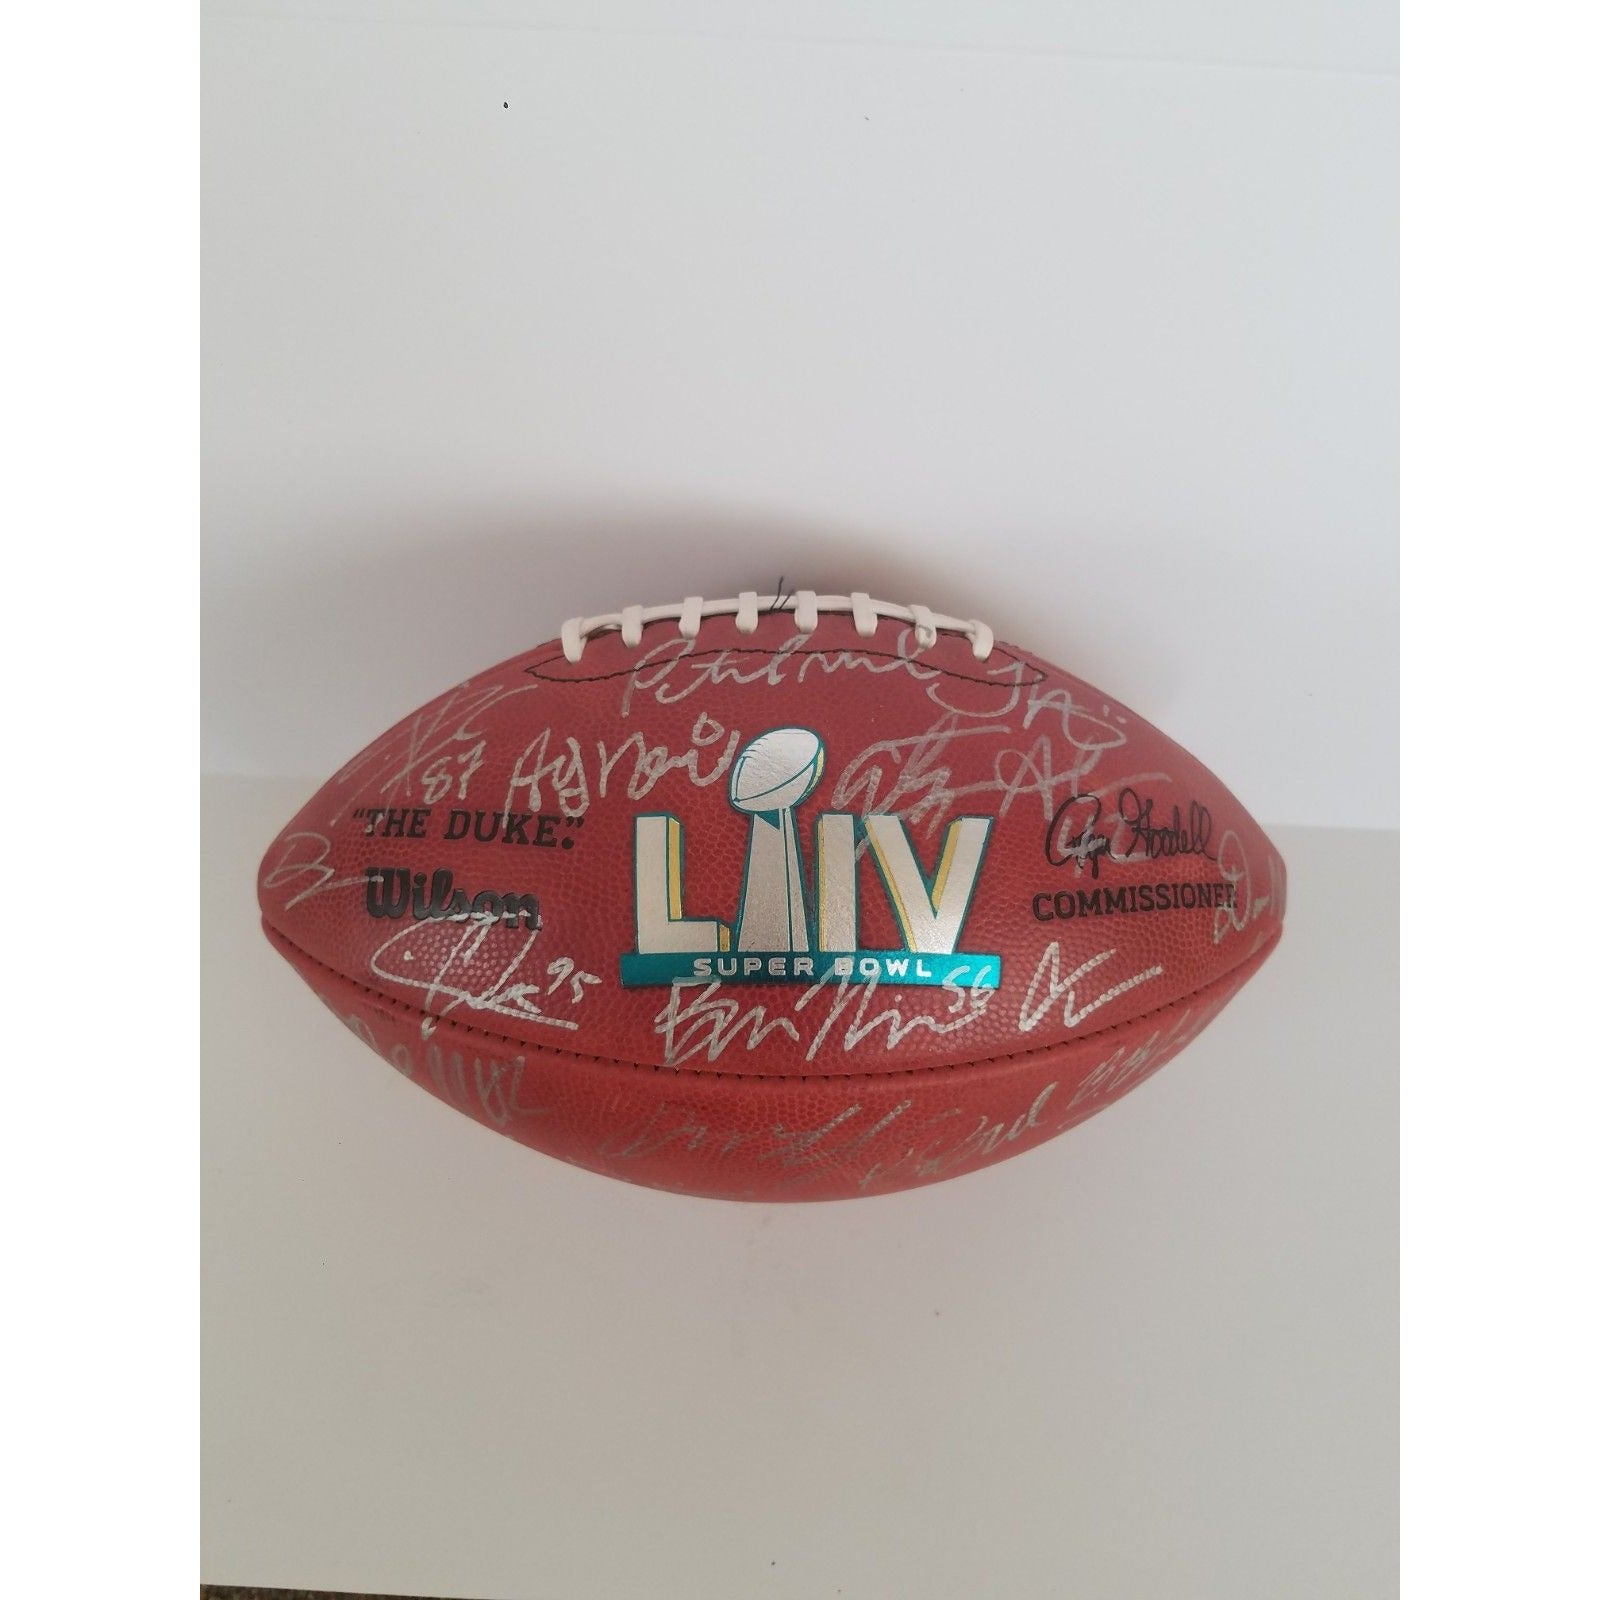 Patrick Mahomes, Andy Reid, Travis Kelce, Tyreek Hill, 2020 Kansas City Chiefs Super Bowl champions NFL game ball signed with proof